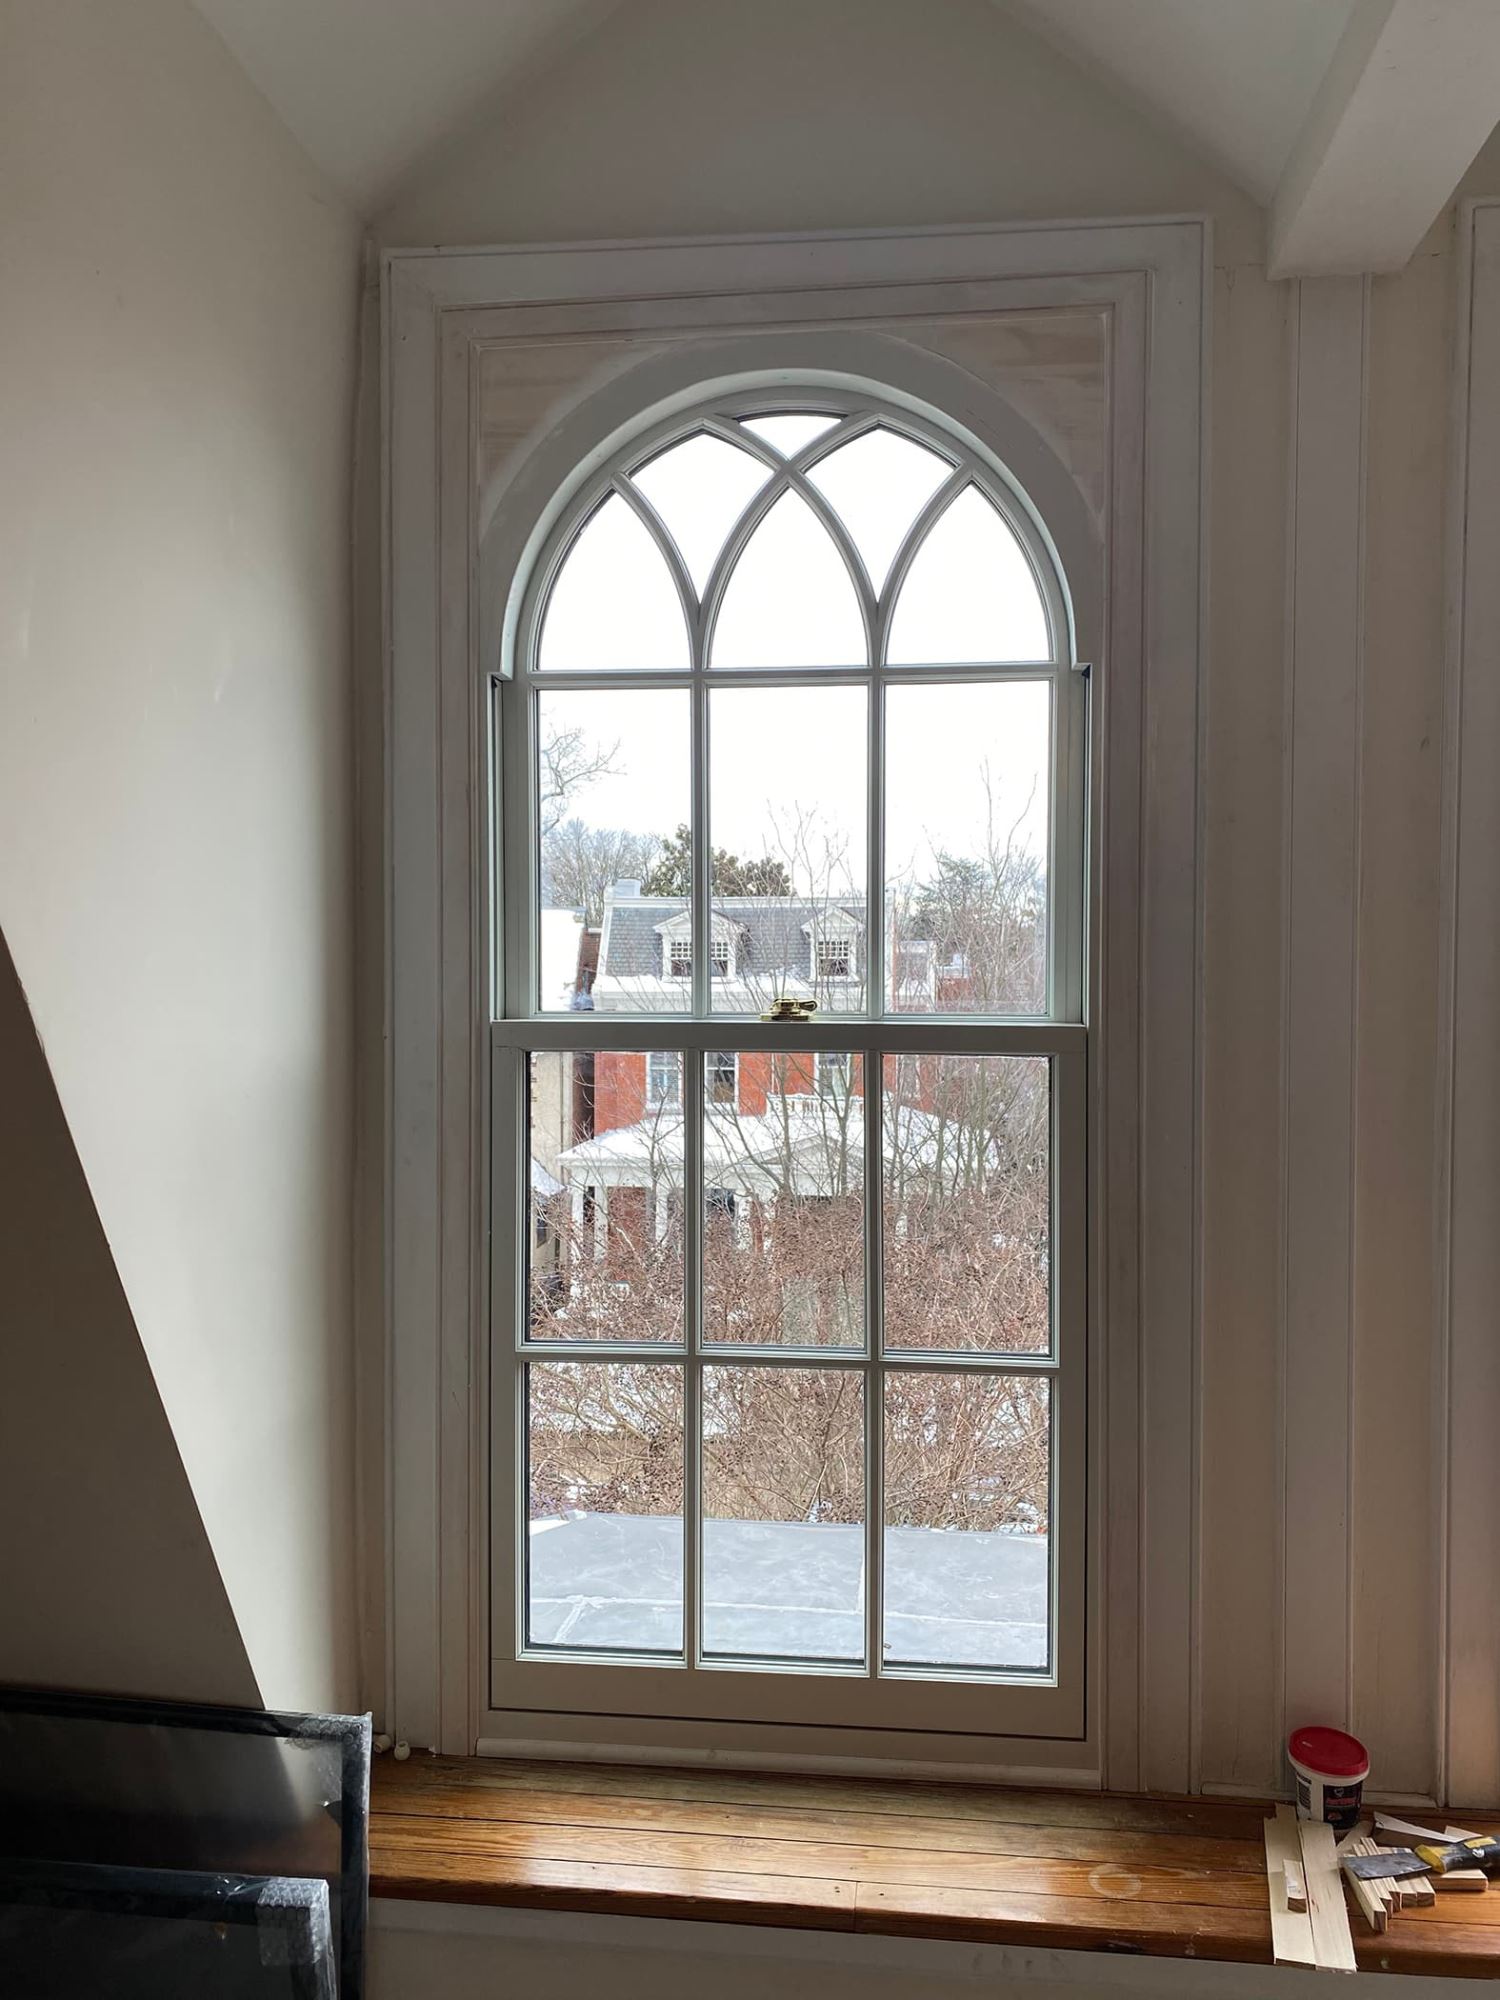 Interior of arched window replacement with custom framing